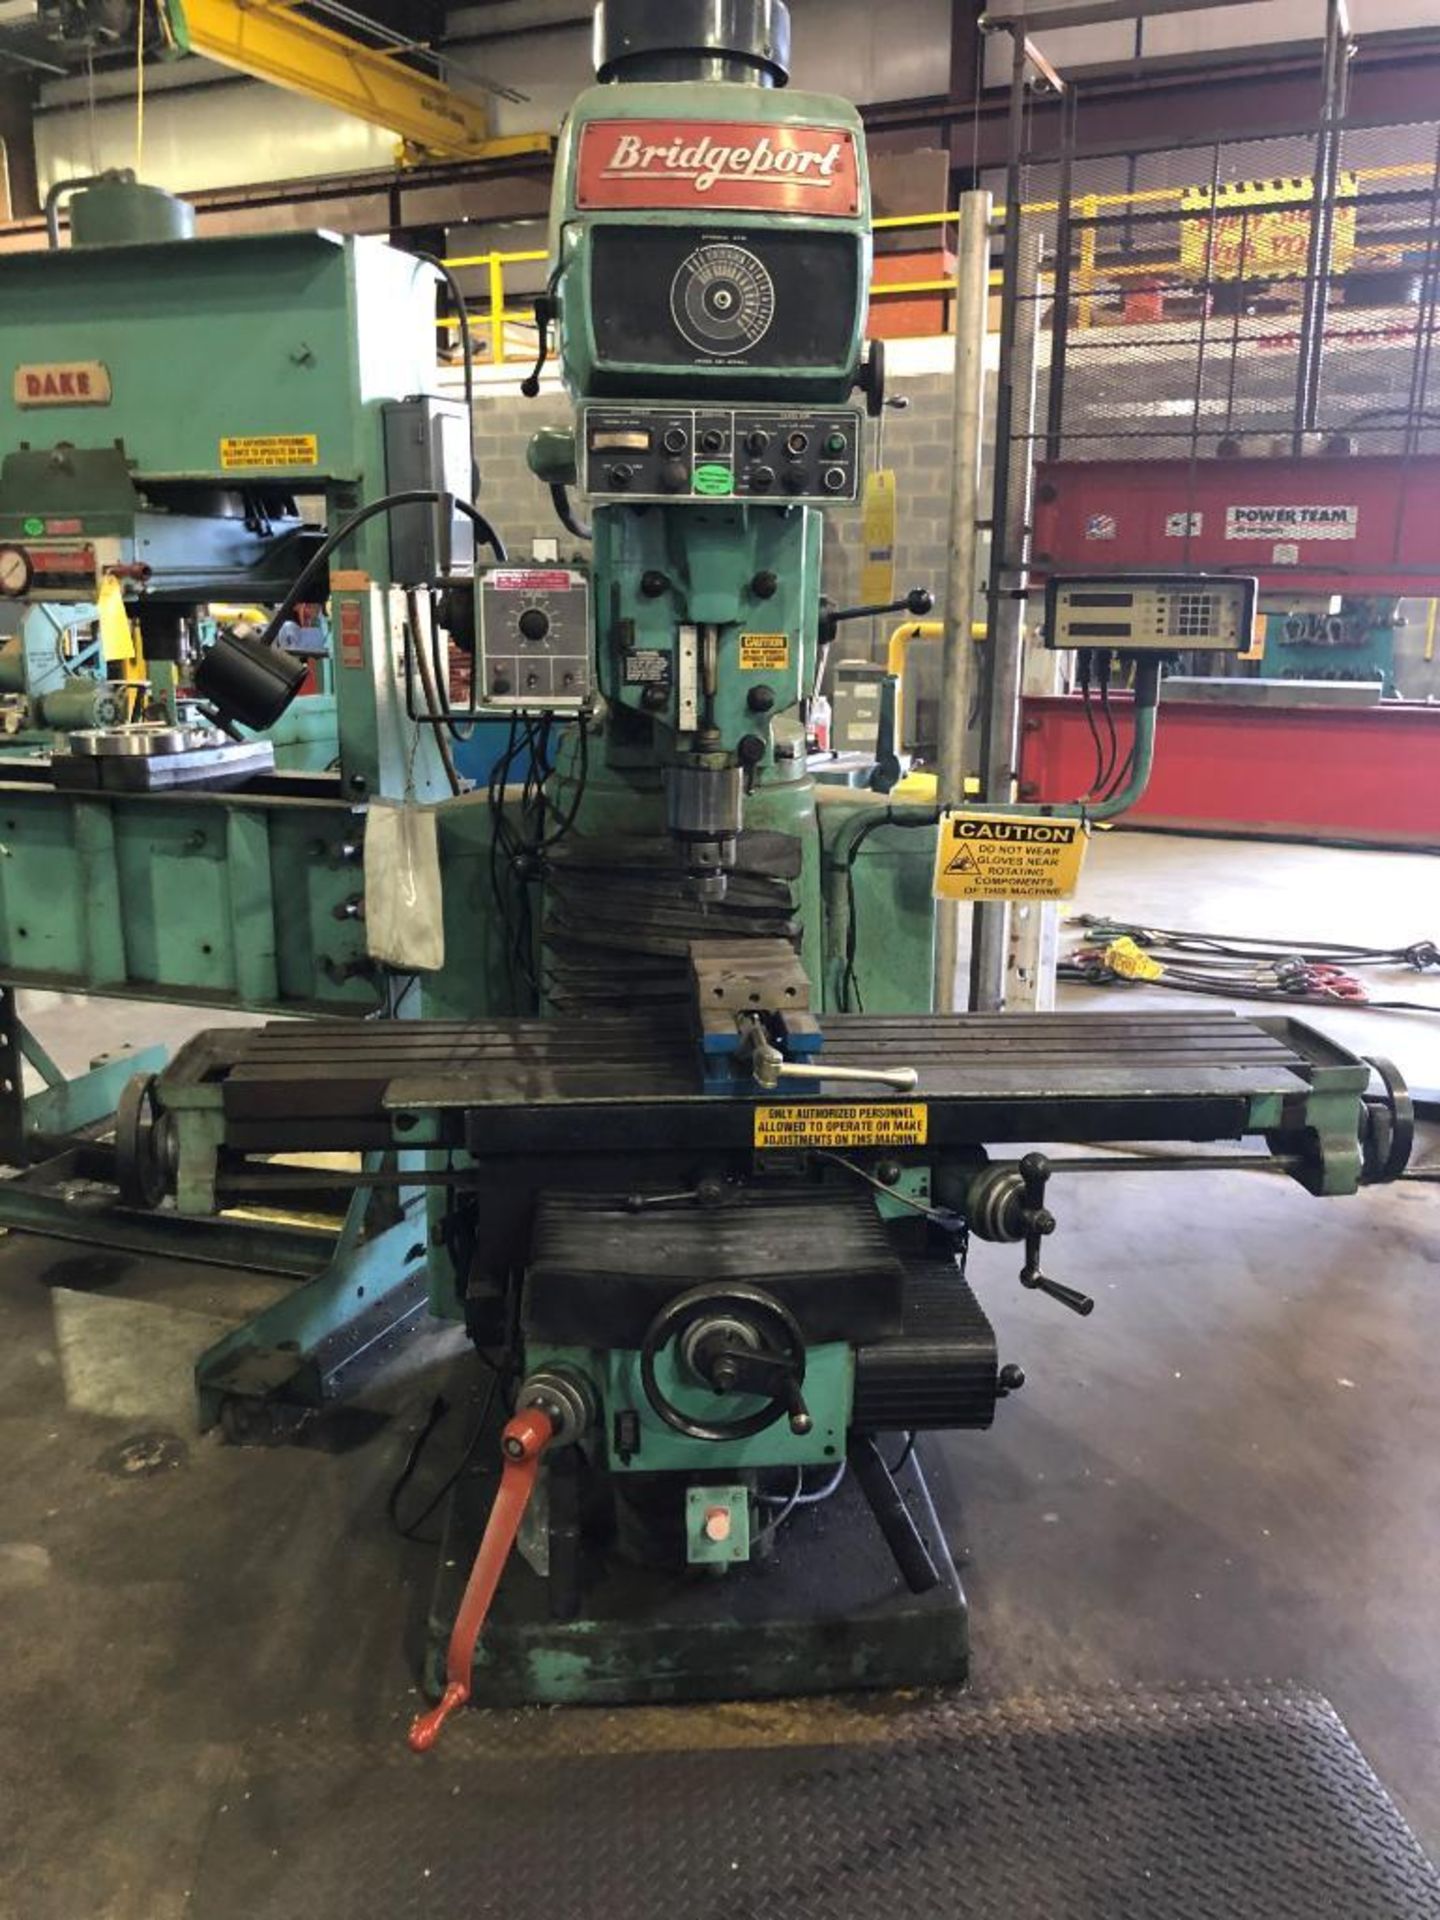 BRIDGEPORT SERIES 2 VERTICAL MILL, 2-AXIS DRO, 58'' X 11'' TABLE, KNEE BED, 50-3500 SPINDLE RPM, KUR